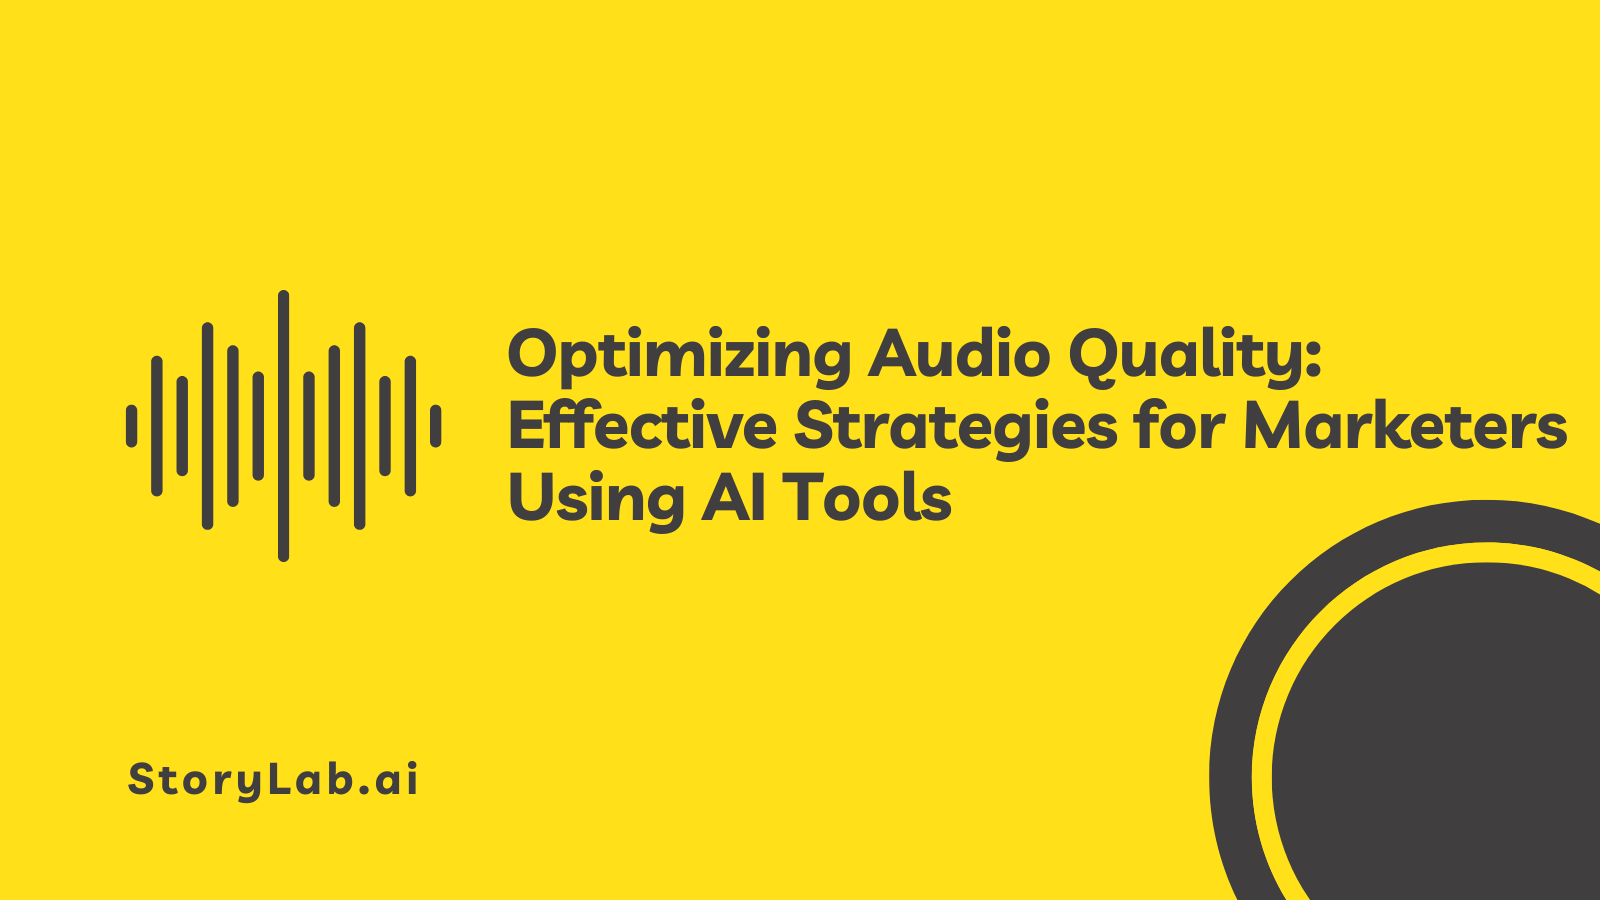 Optimizing Audio Quality Effective Strategies for Marketers Using AI Tools